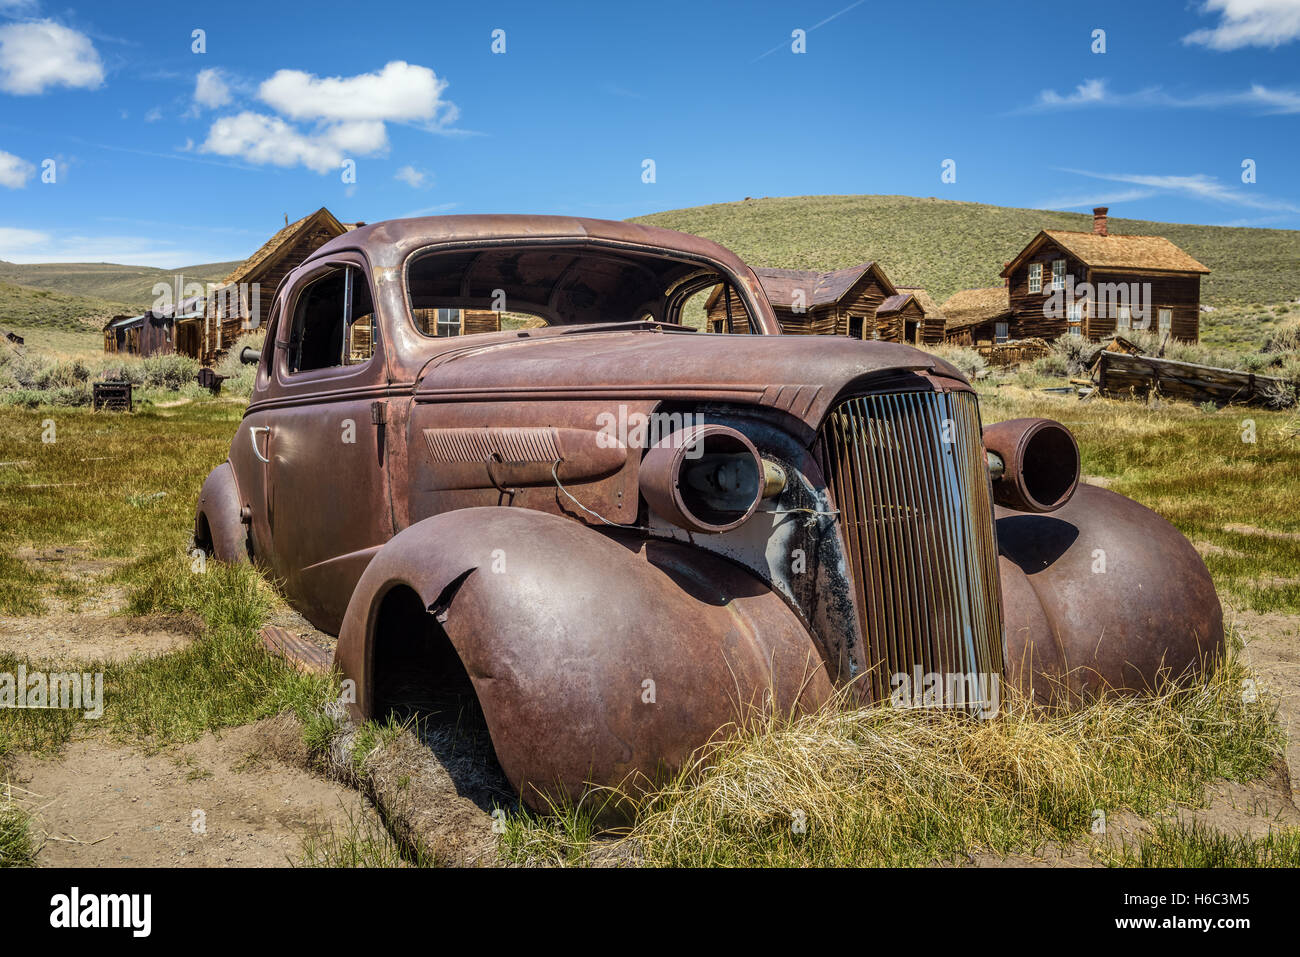 Car wreck in Bodie ghost town, California Stock Photo